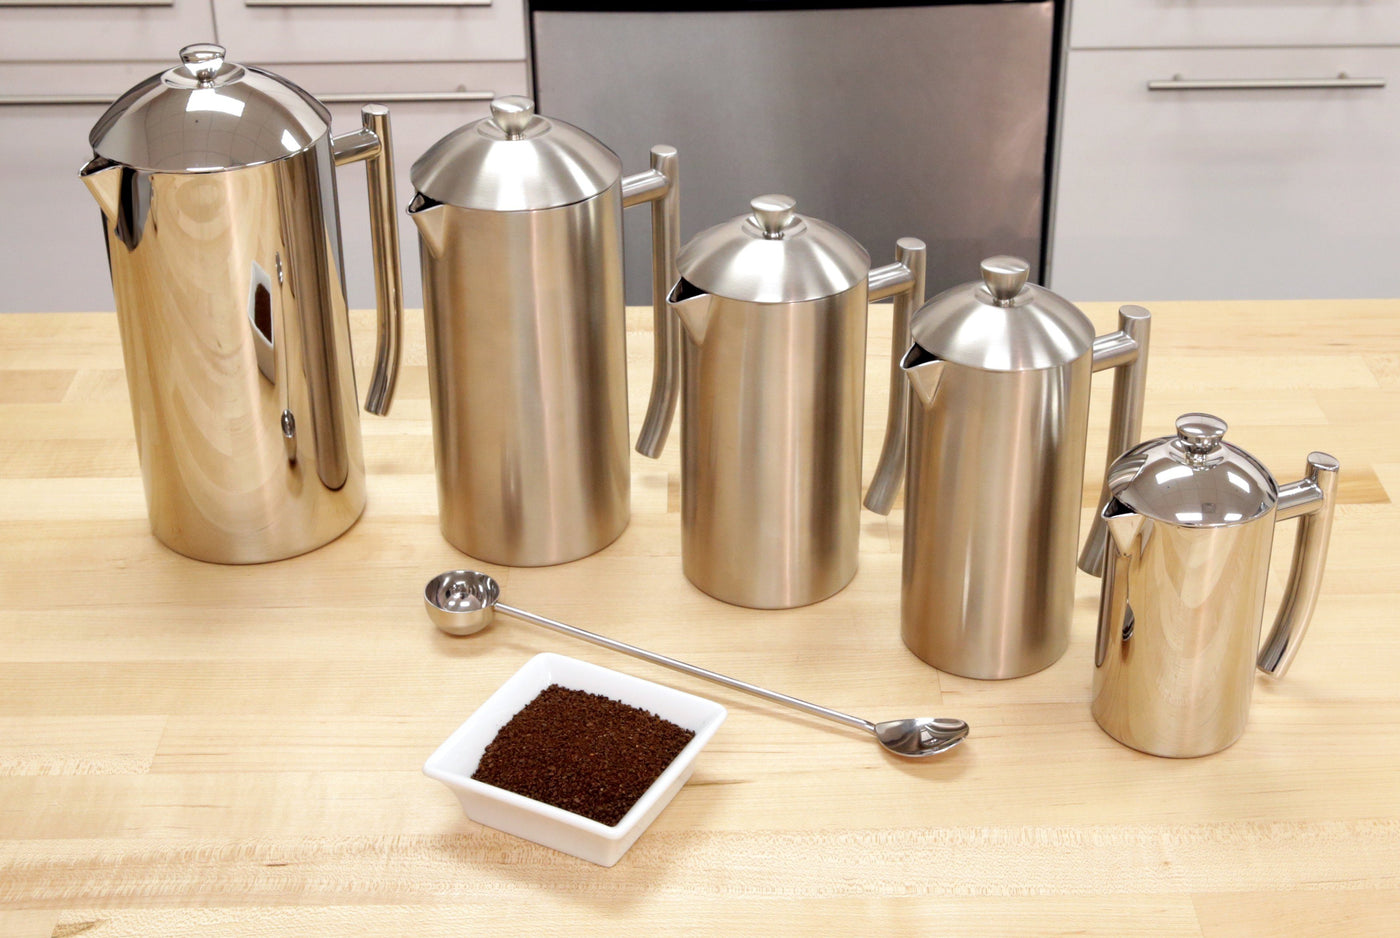 Frieling French Press - Double Wall, Stainless Steel with with